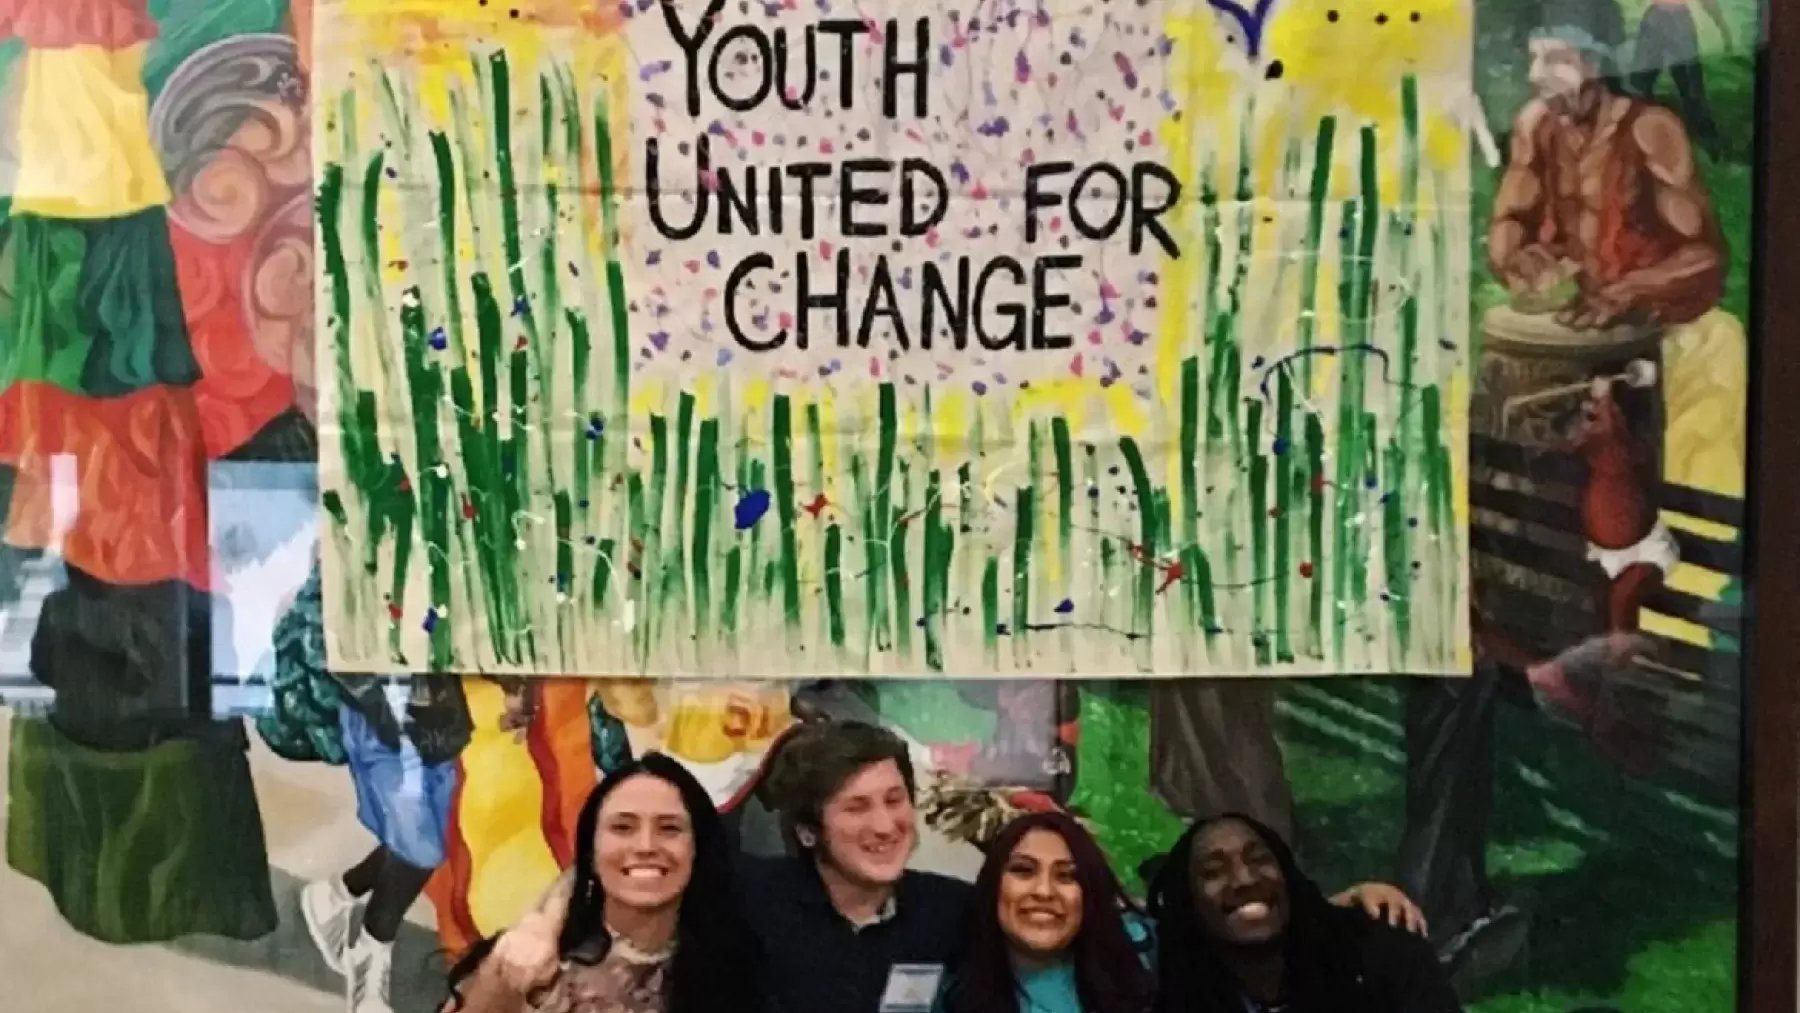 Youth United for Change Group Photo